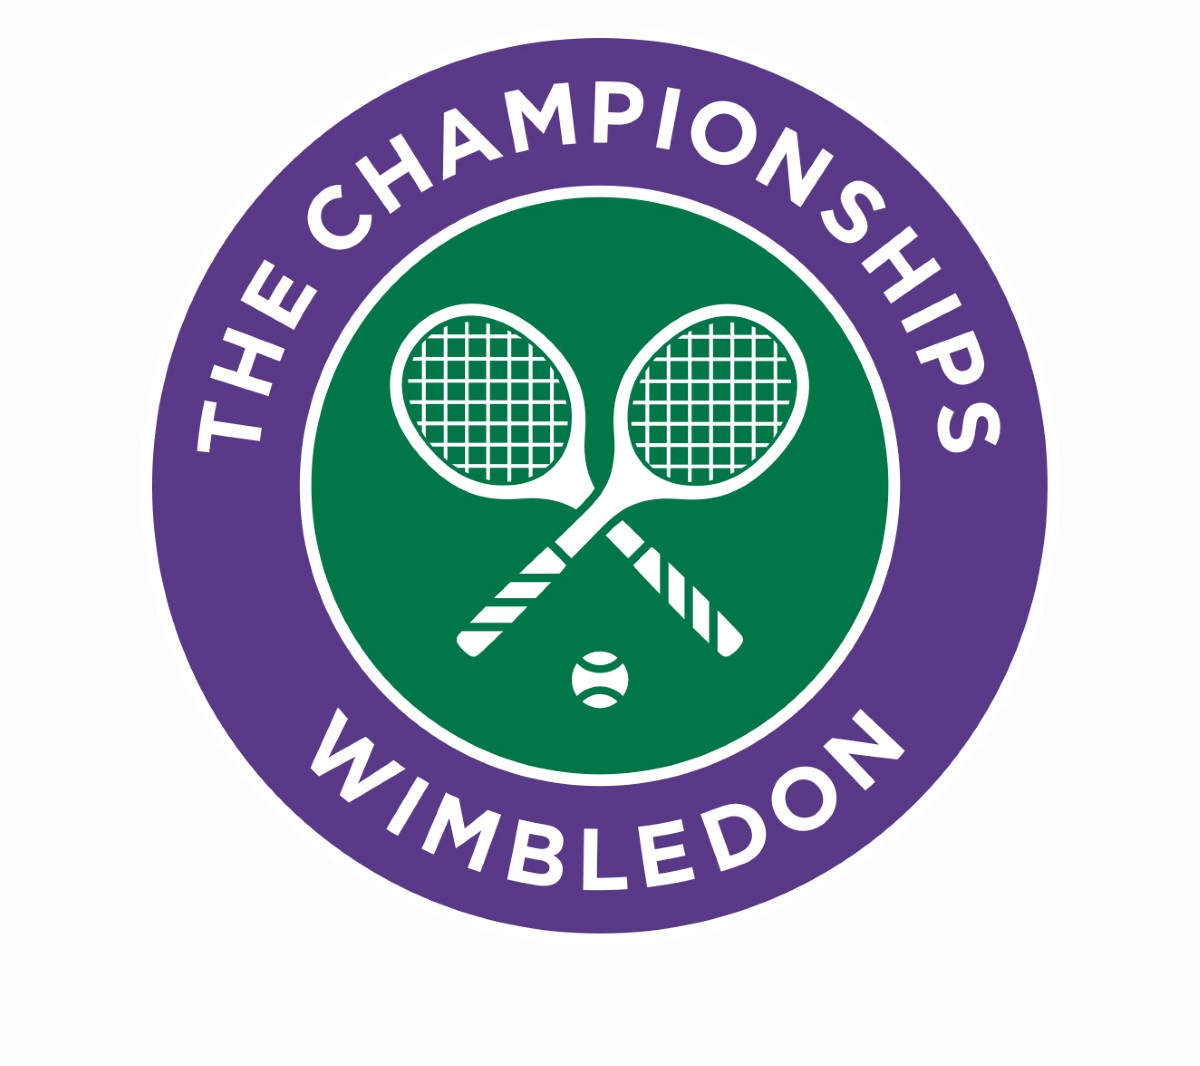 Will you be embracing the British tradition that is Wimbledon this summer?